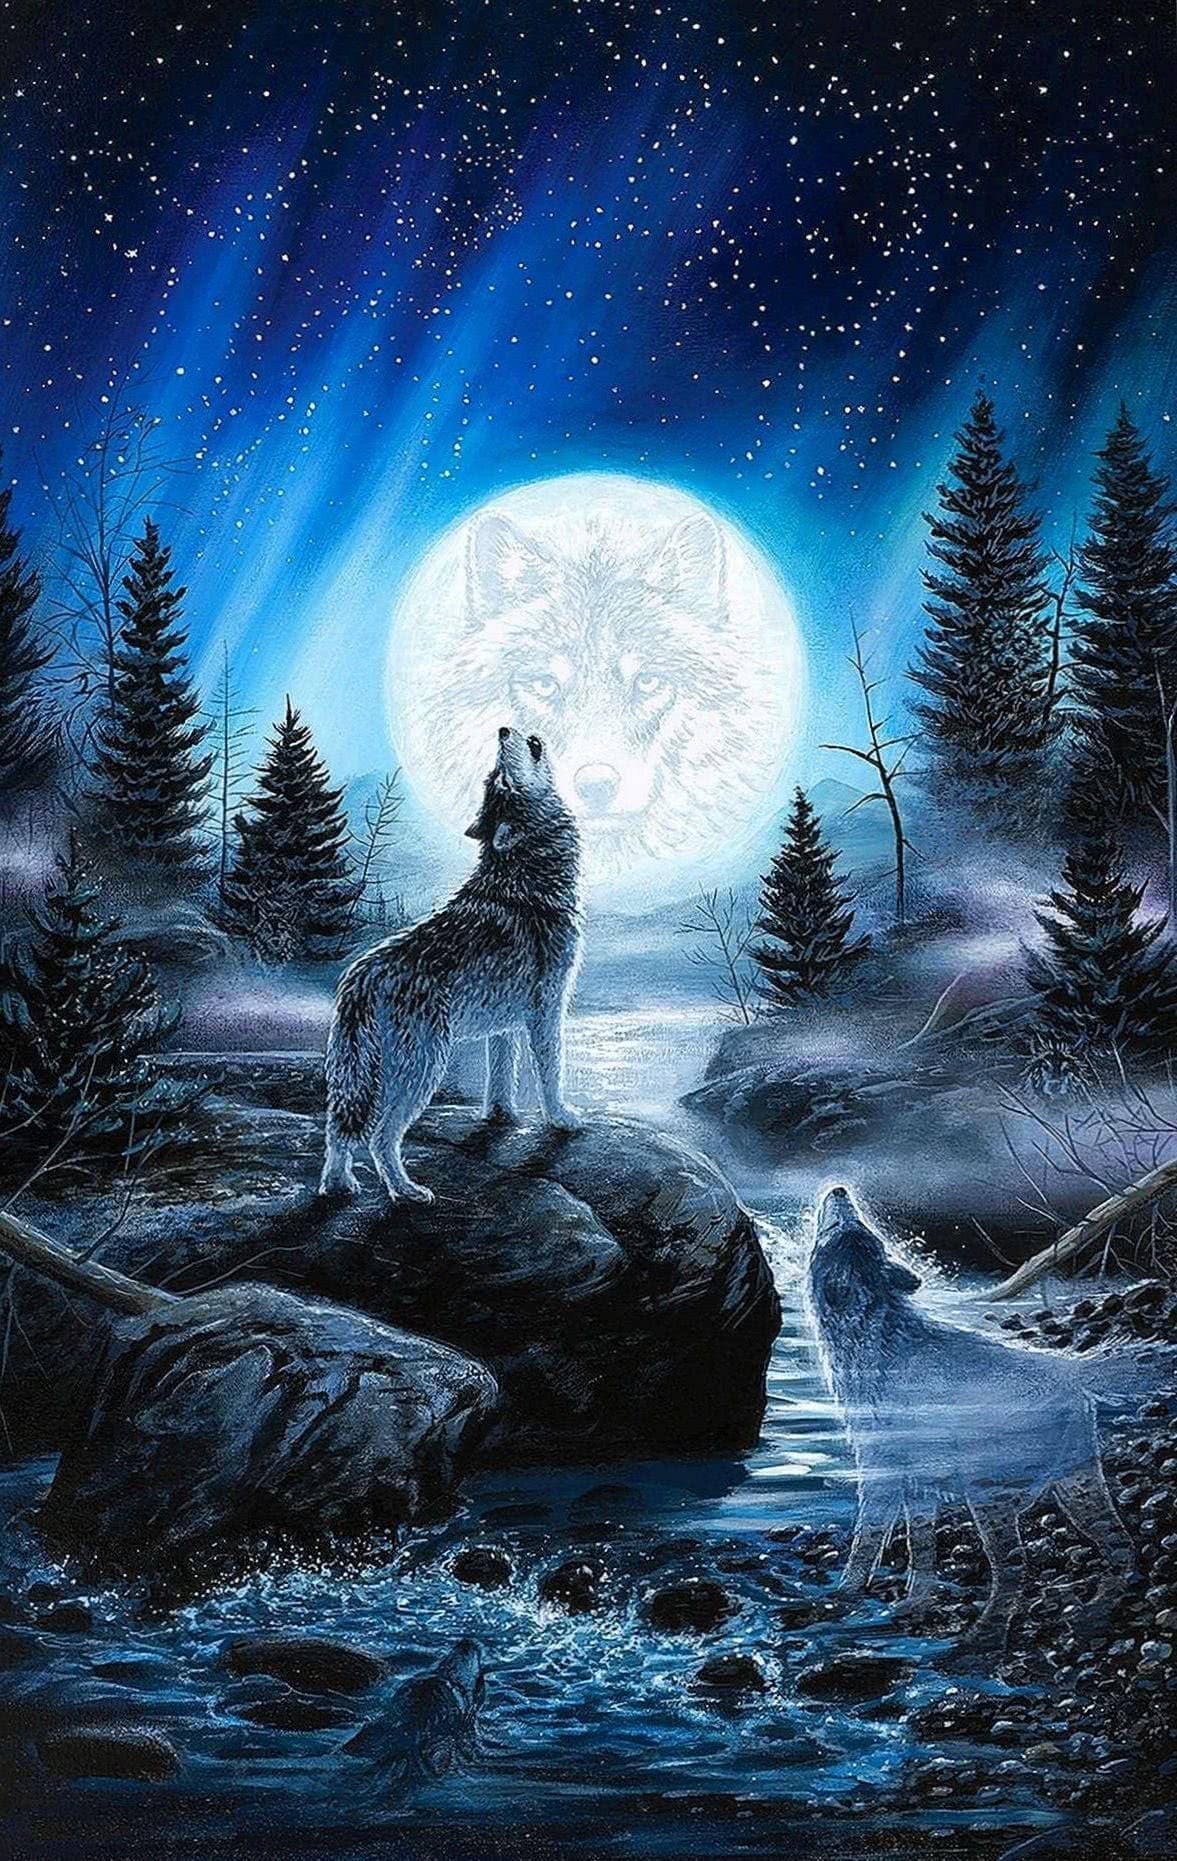 Wolf Howling Wallpapers iPhone